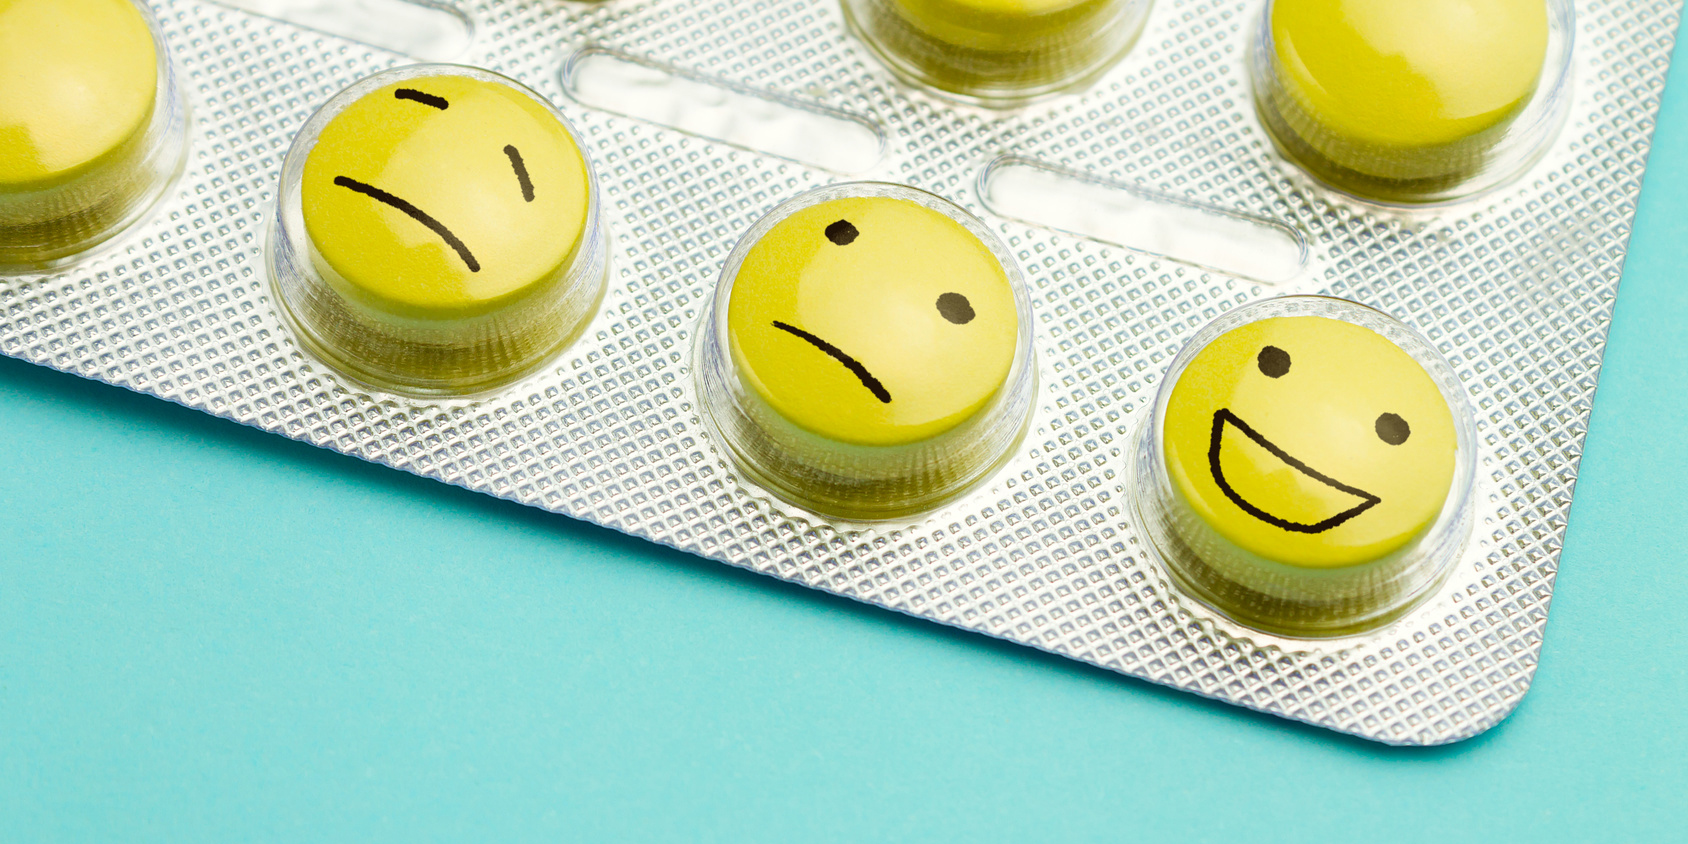 Are Antidepressants to Blame For America’s Violence Epidemic?